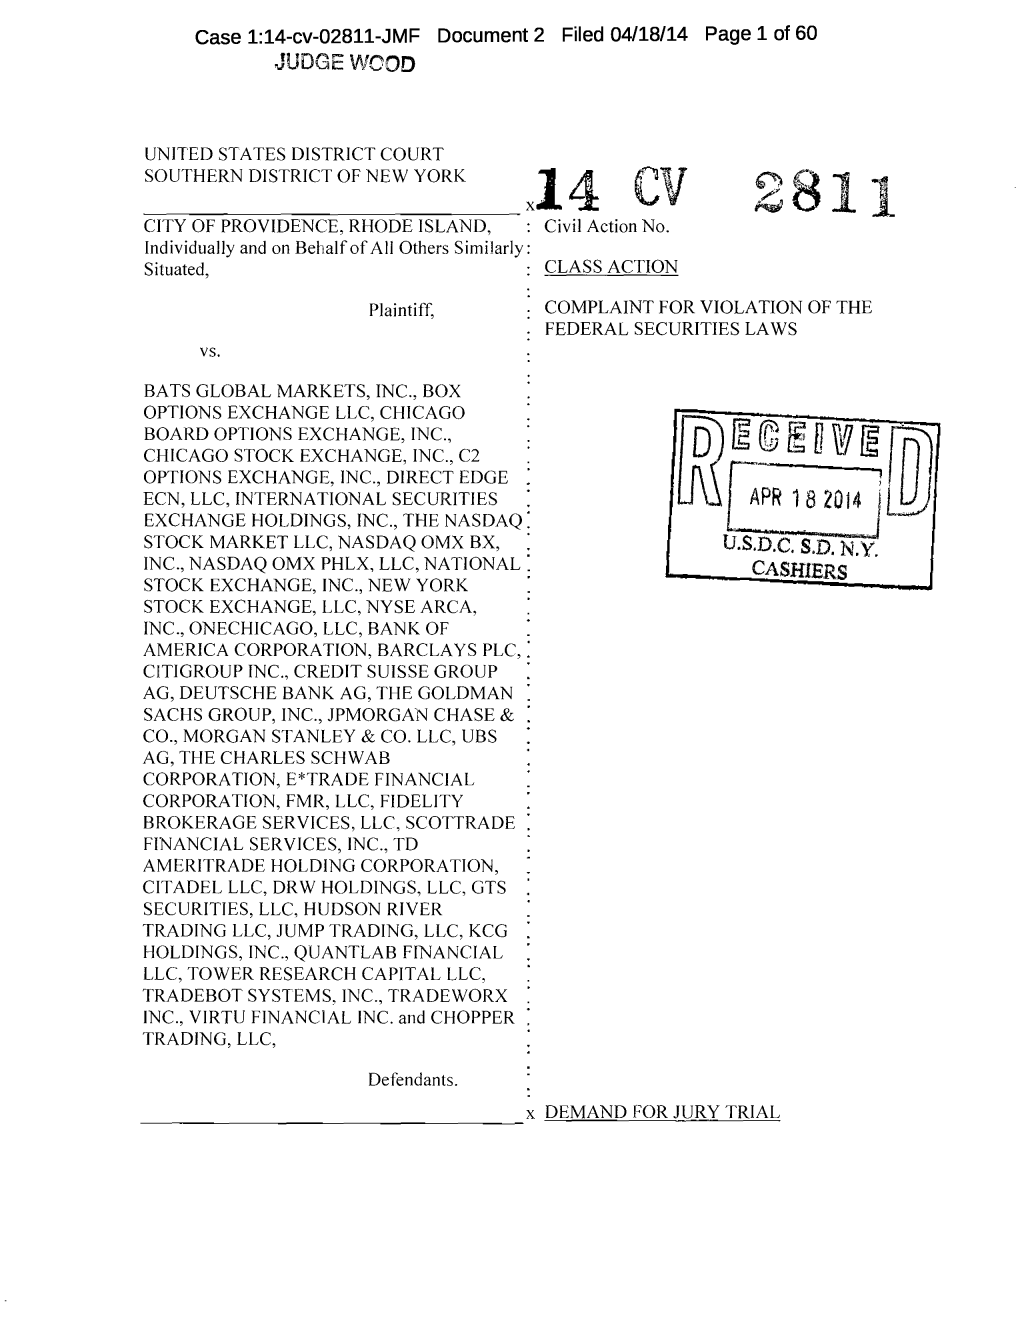 Case 1:14-Cv-02811-JMF Document 2 Filed 04/18/14 Page 1 of 60 T Uuf!T P Vccd